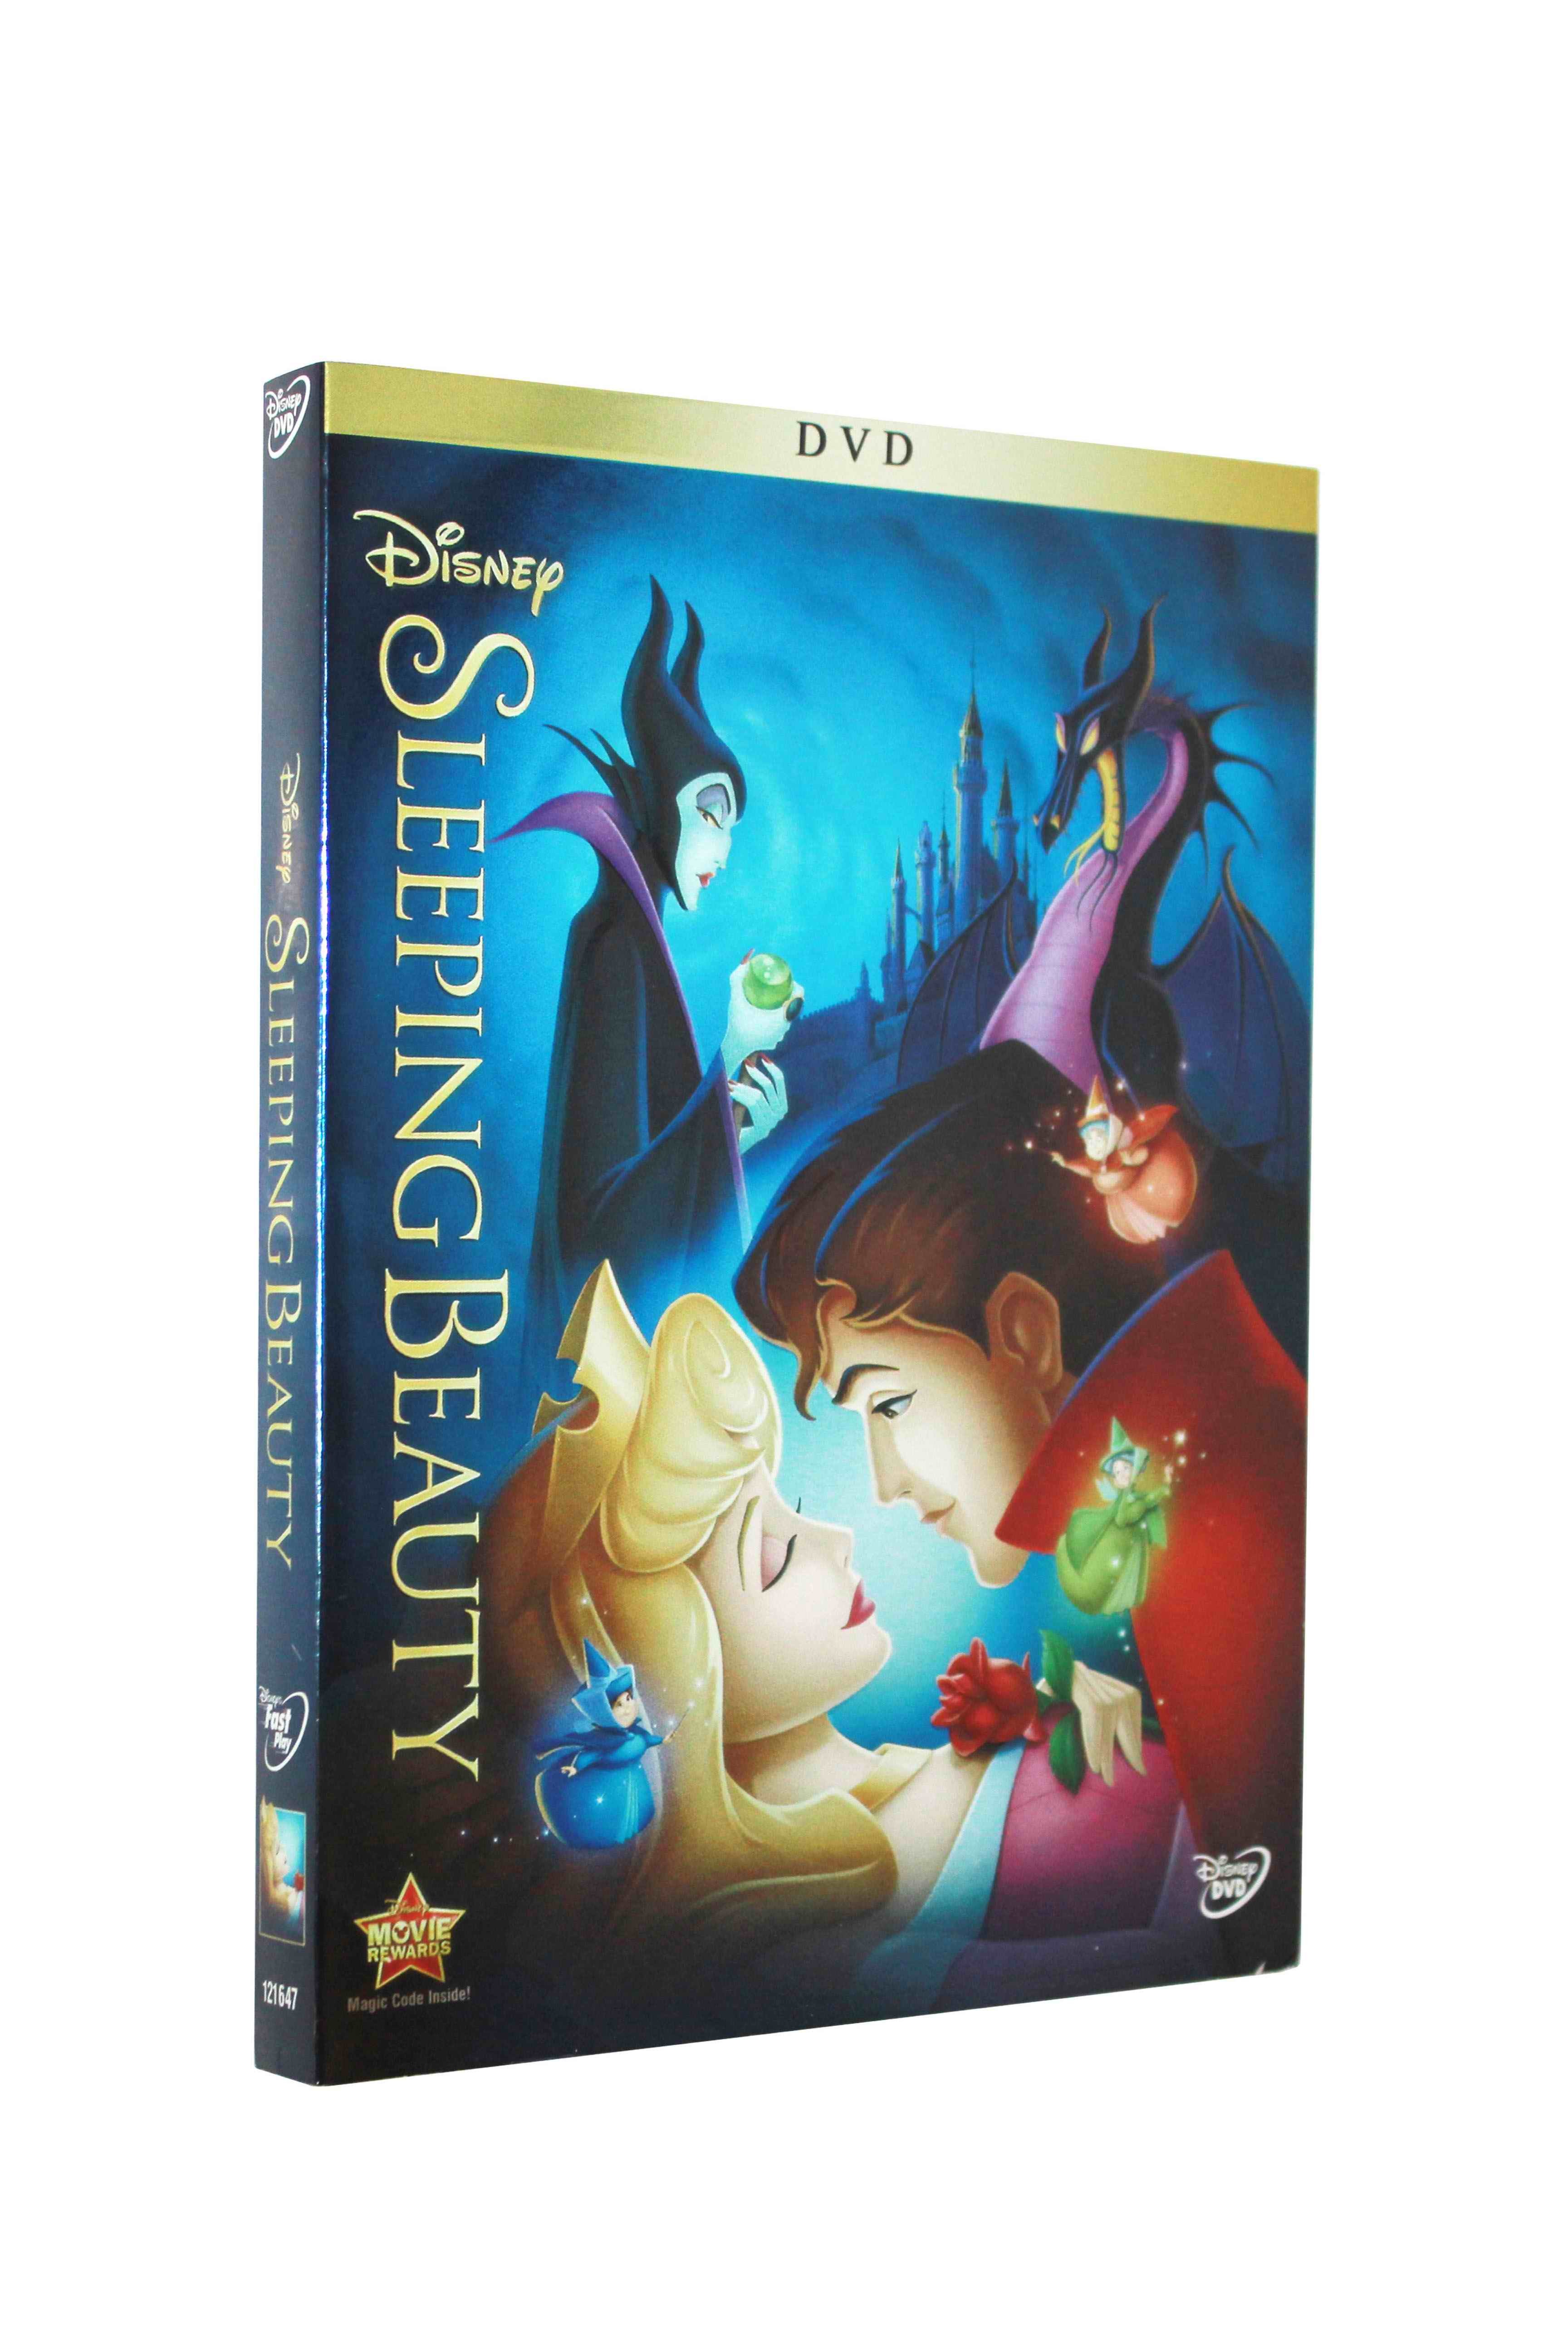 China Free DHL Shipping@New Release HOT Cartoon DVD Movies Sleeping Beauty New 2017 Remastered Wholesale,New factory sealed! factory